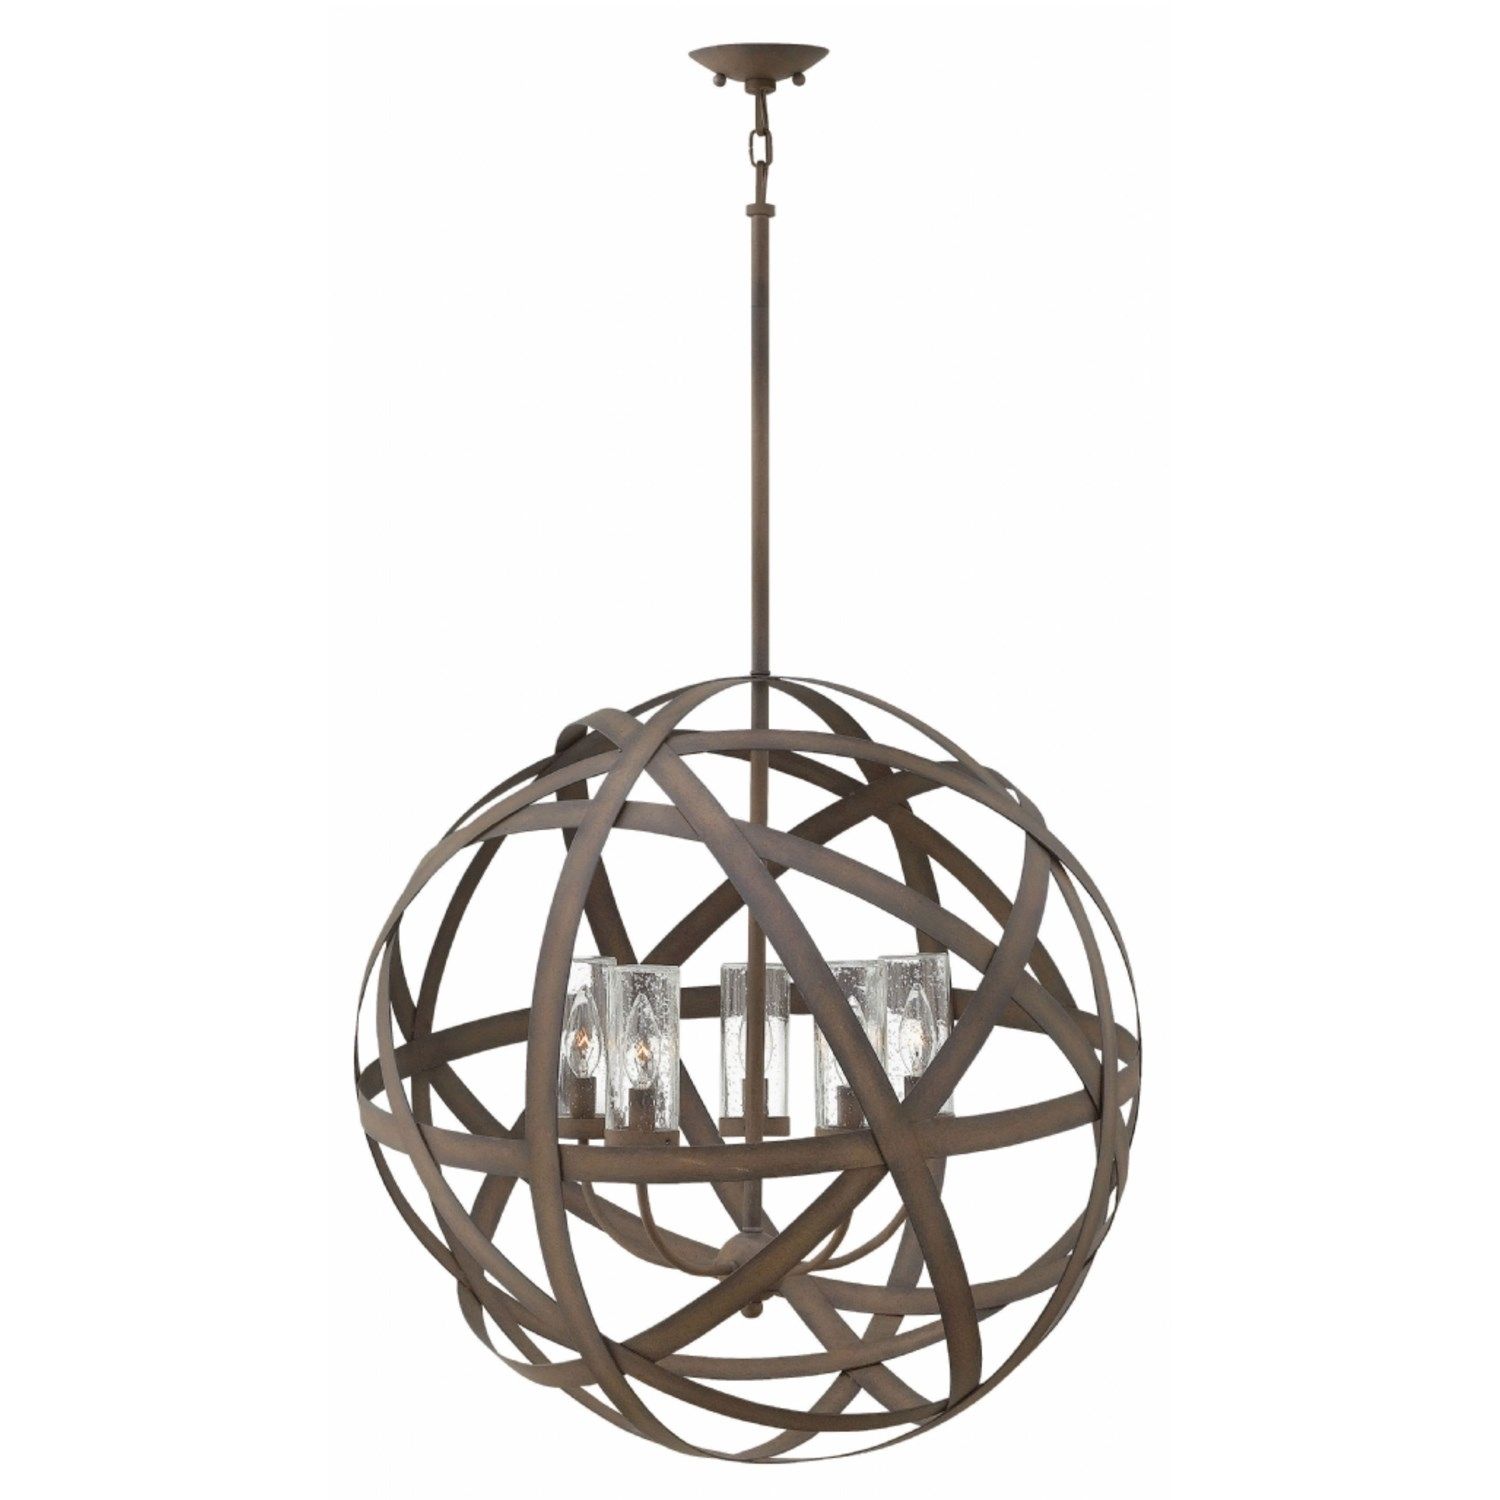 Hinkley 29705vi Carson 5 Light Outdoor Pendant In Vintage Iron For Hinkley Outdoor Ceiling Lights (View 15 of 15)